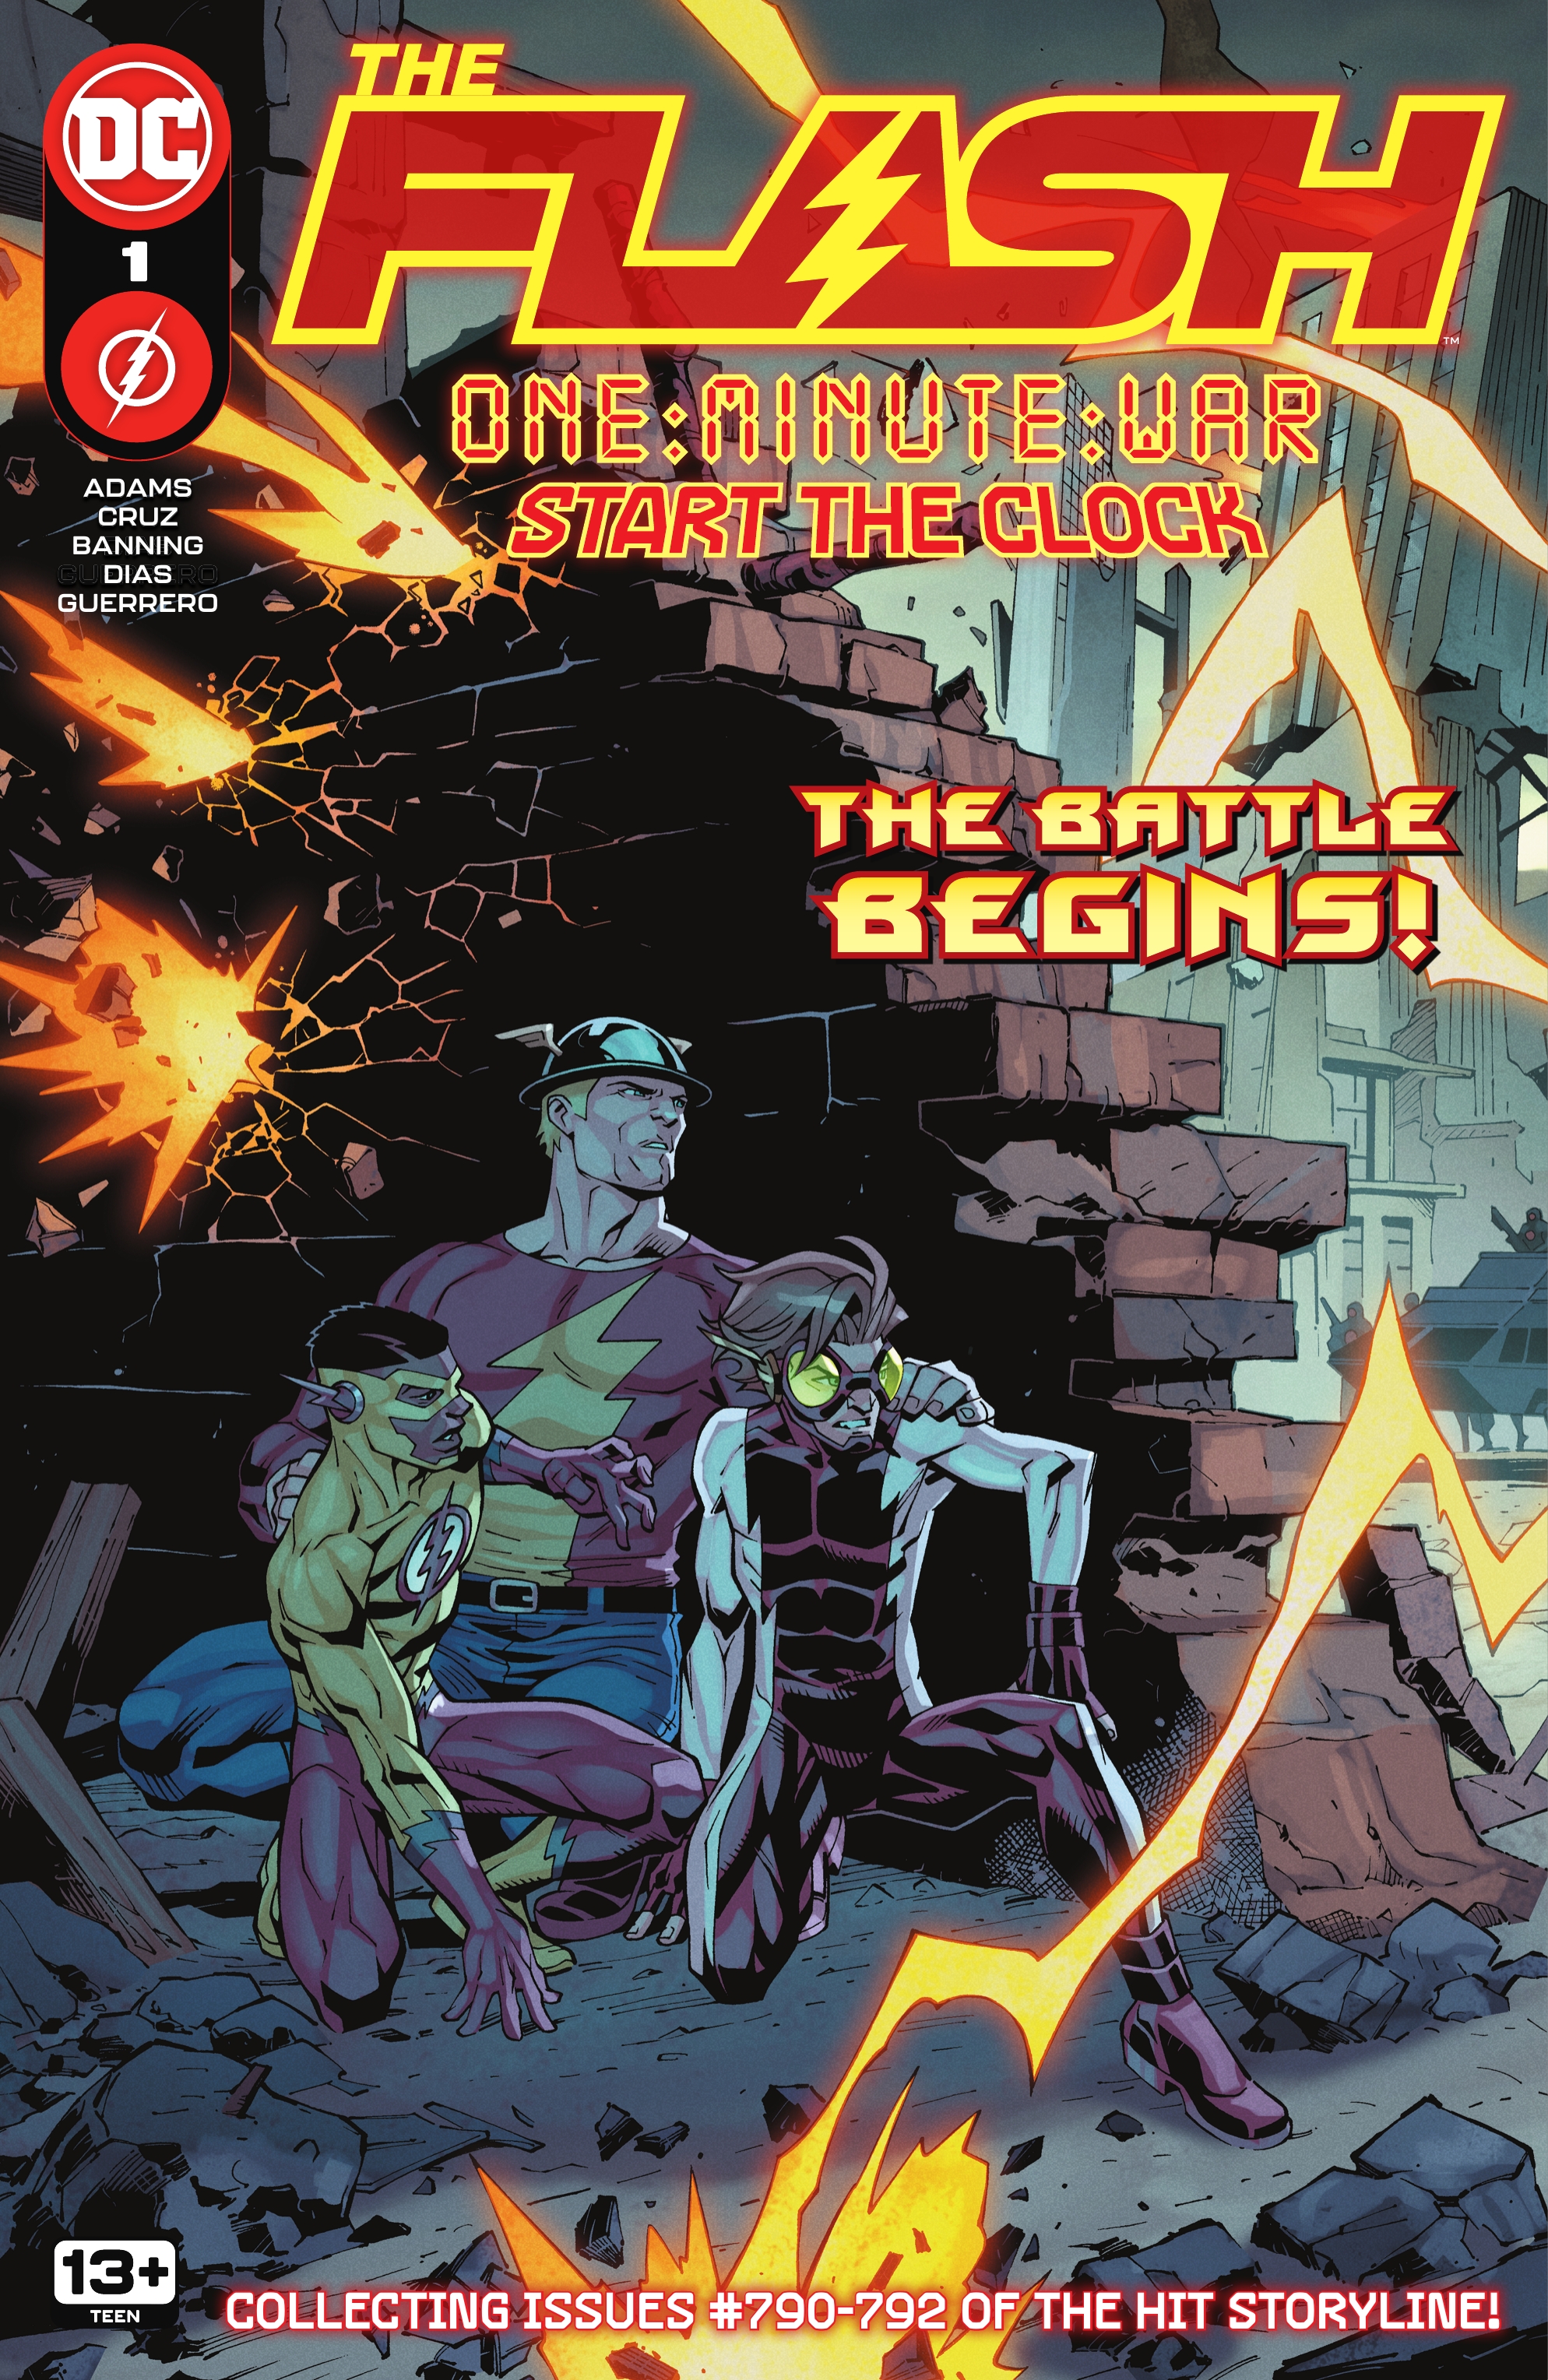 Read online The Flash One-Minute War: Start The Clock comic -  Issue # TPB - 1